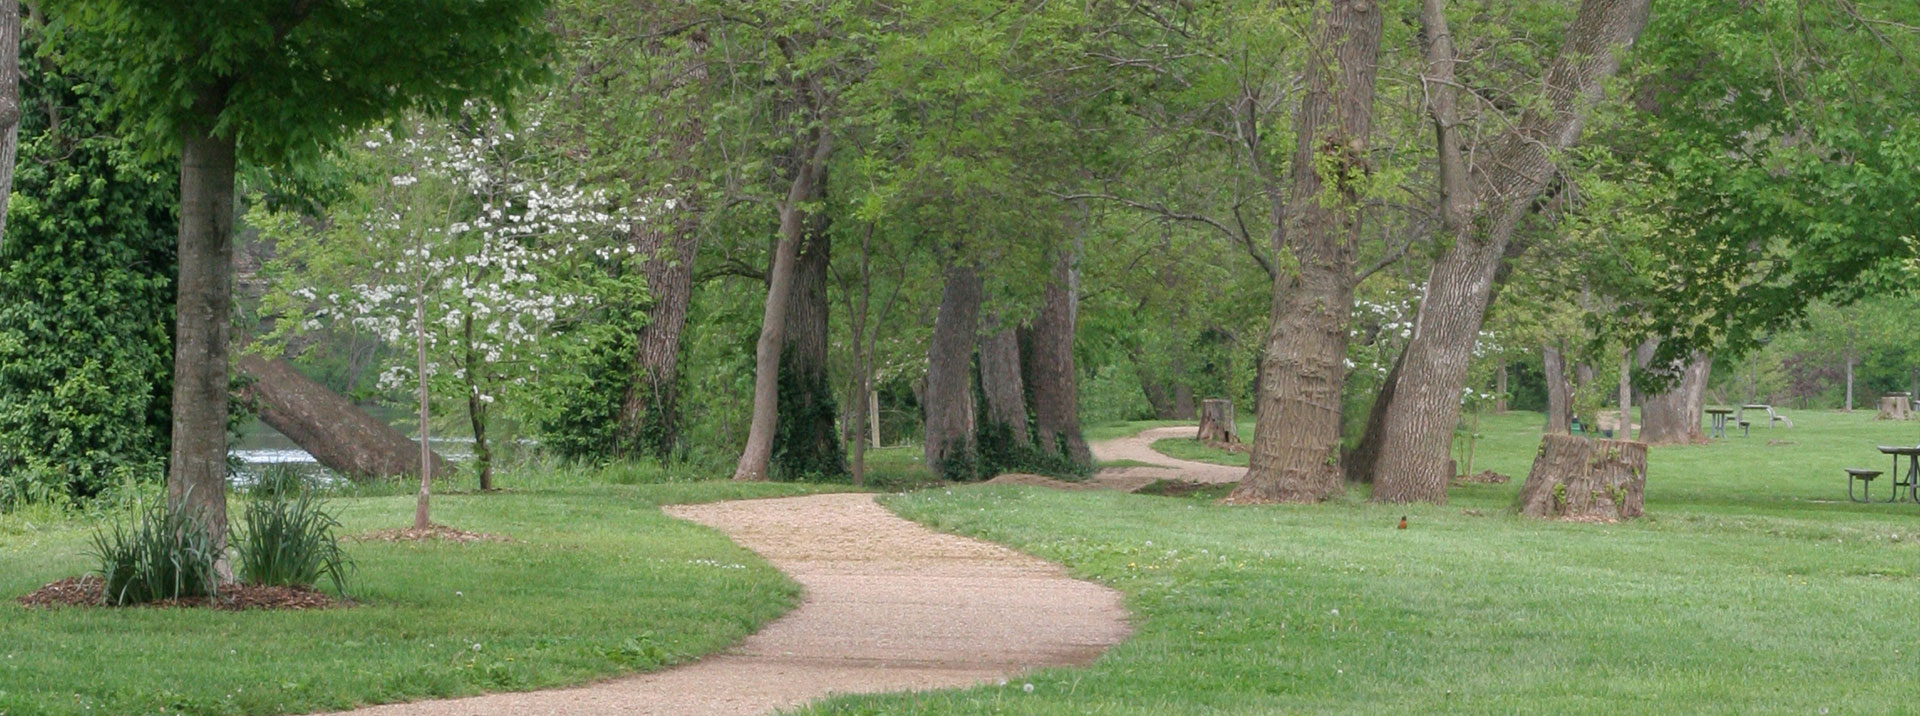 Pathway with trees and grass